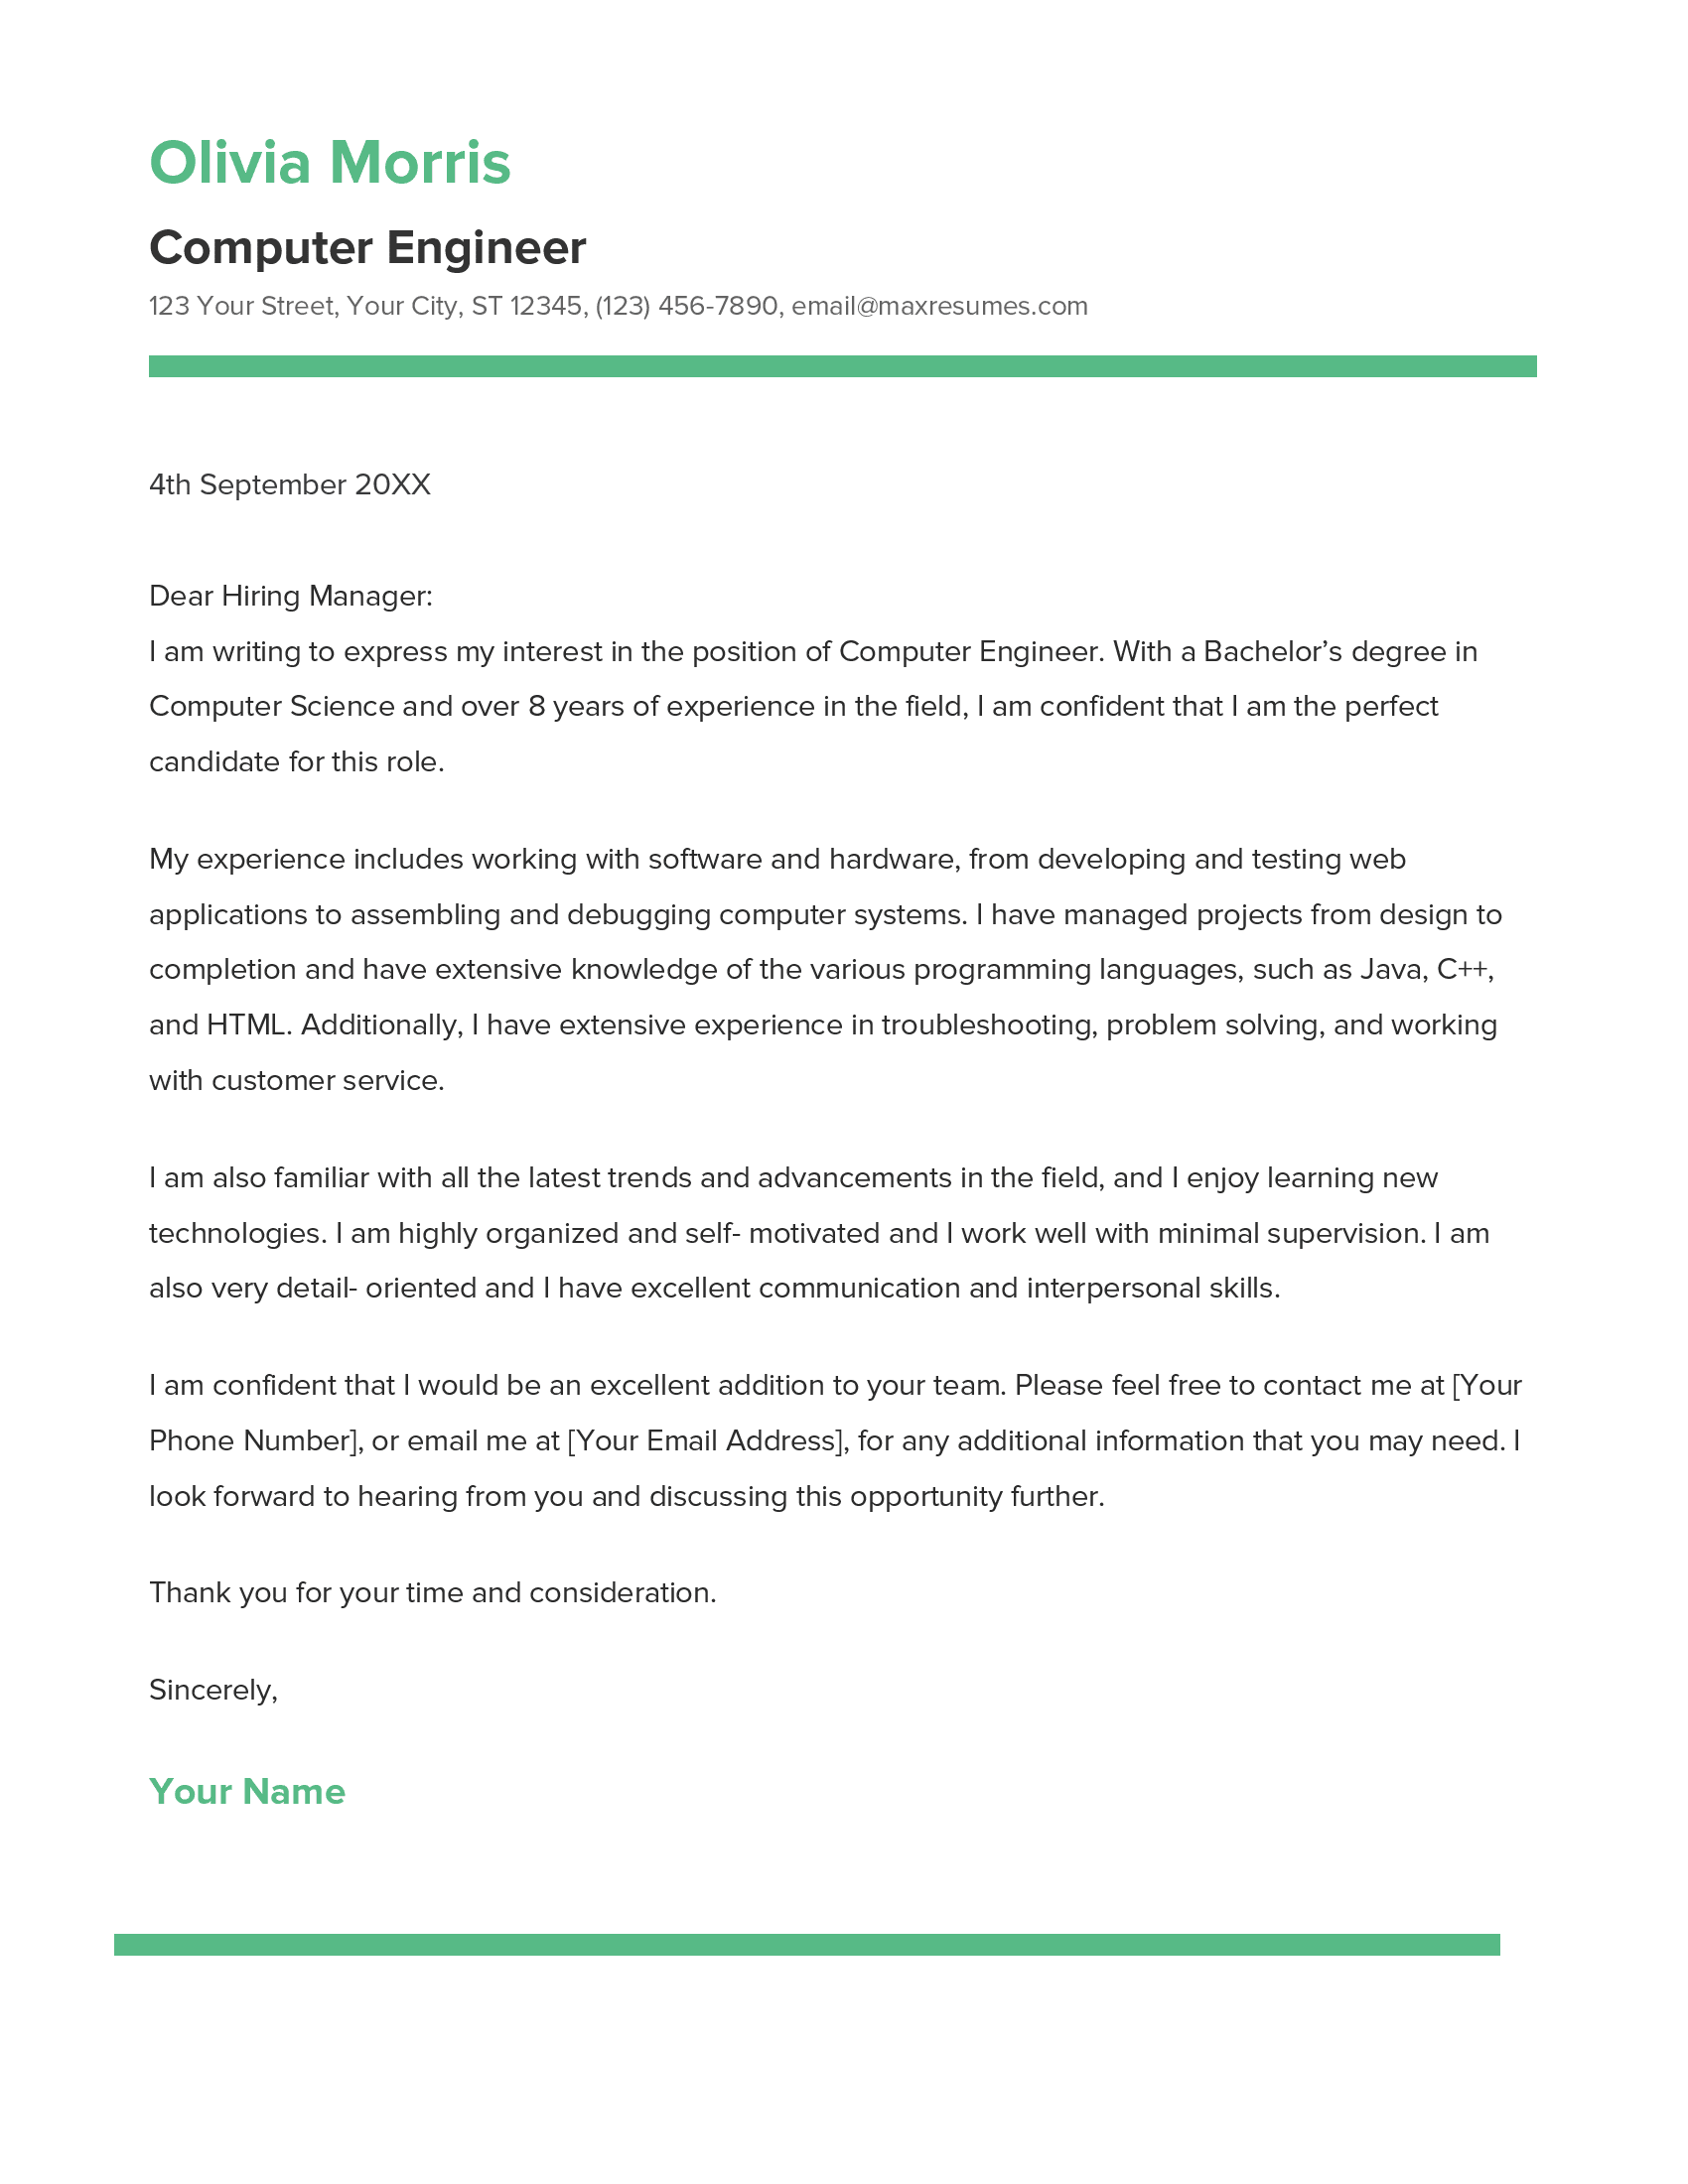 Computer Engineer Cover Letter Example